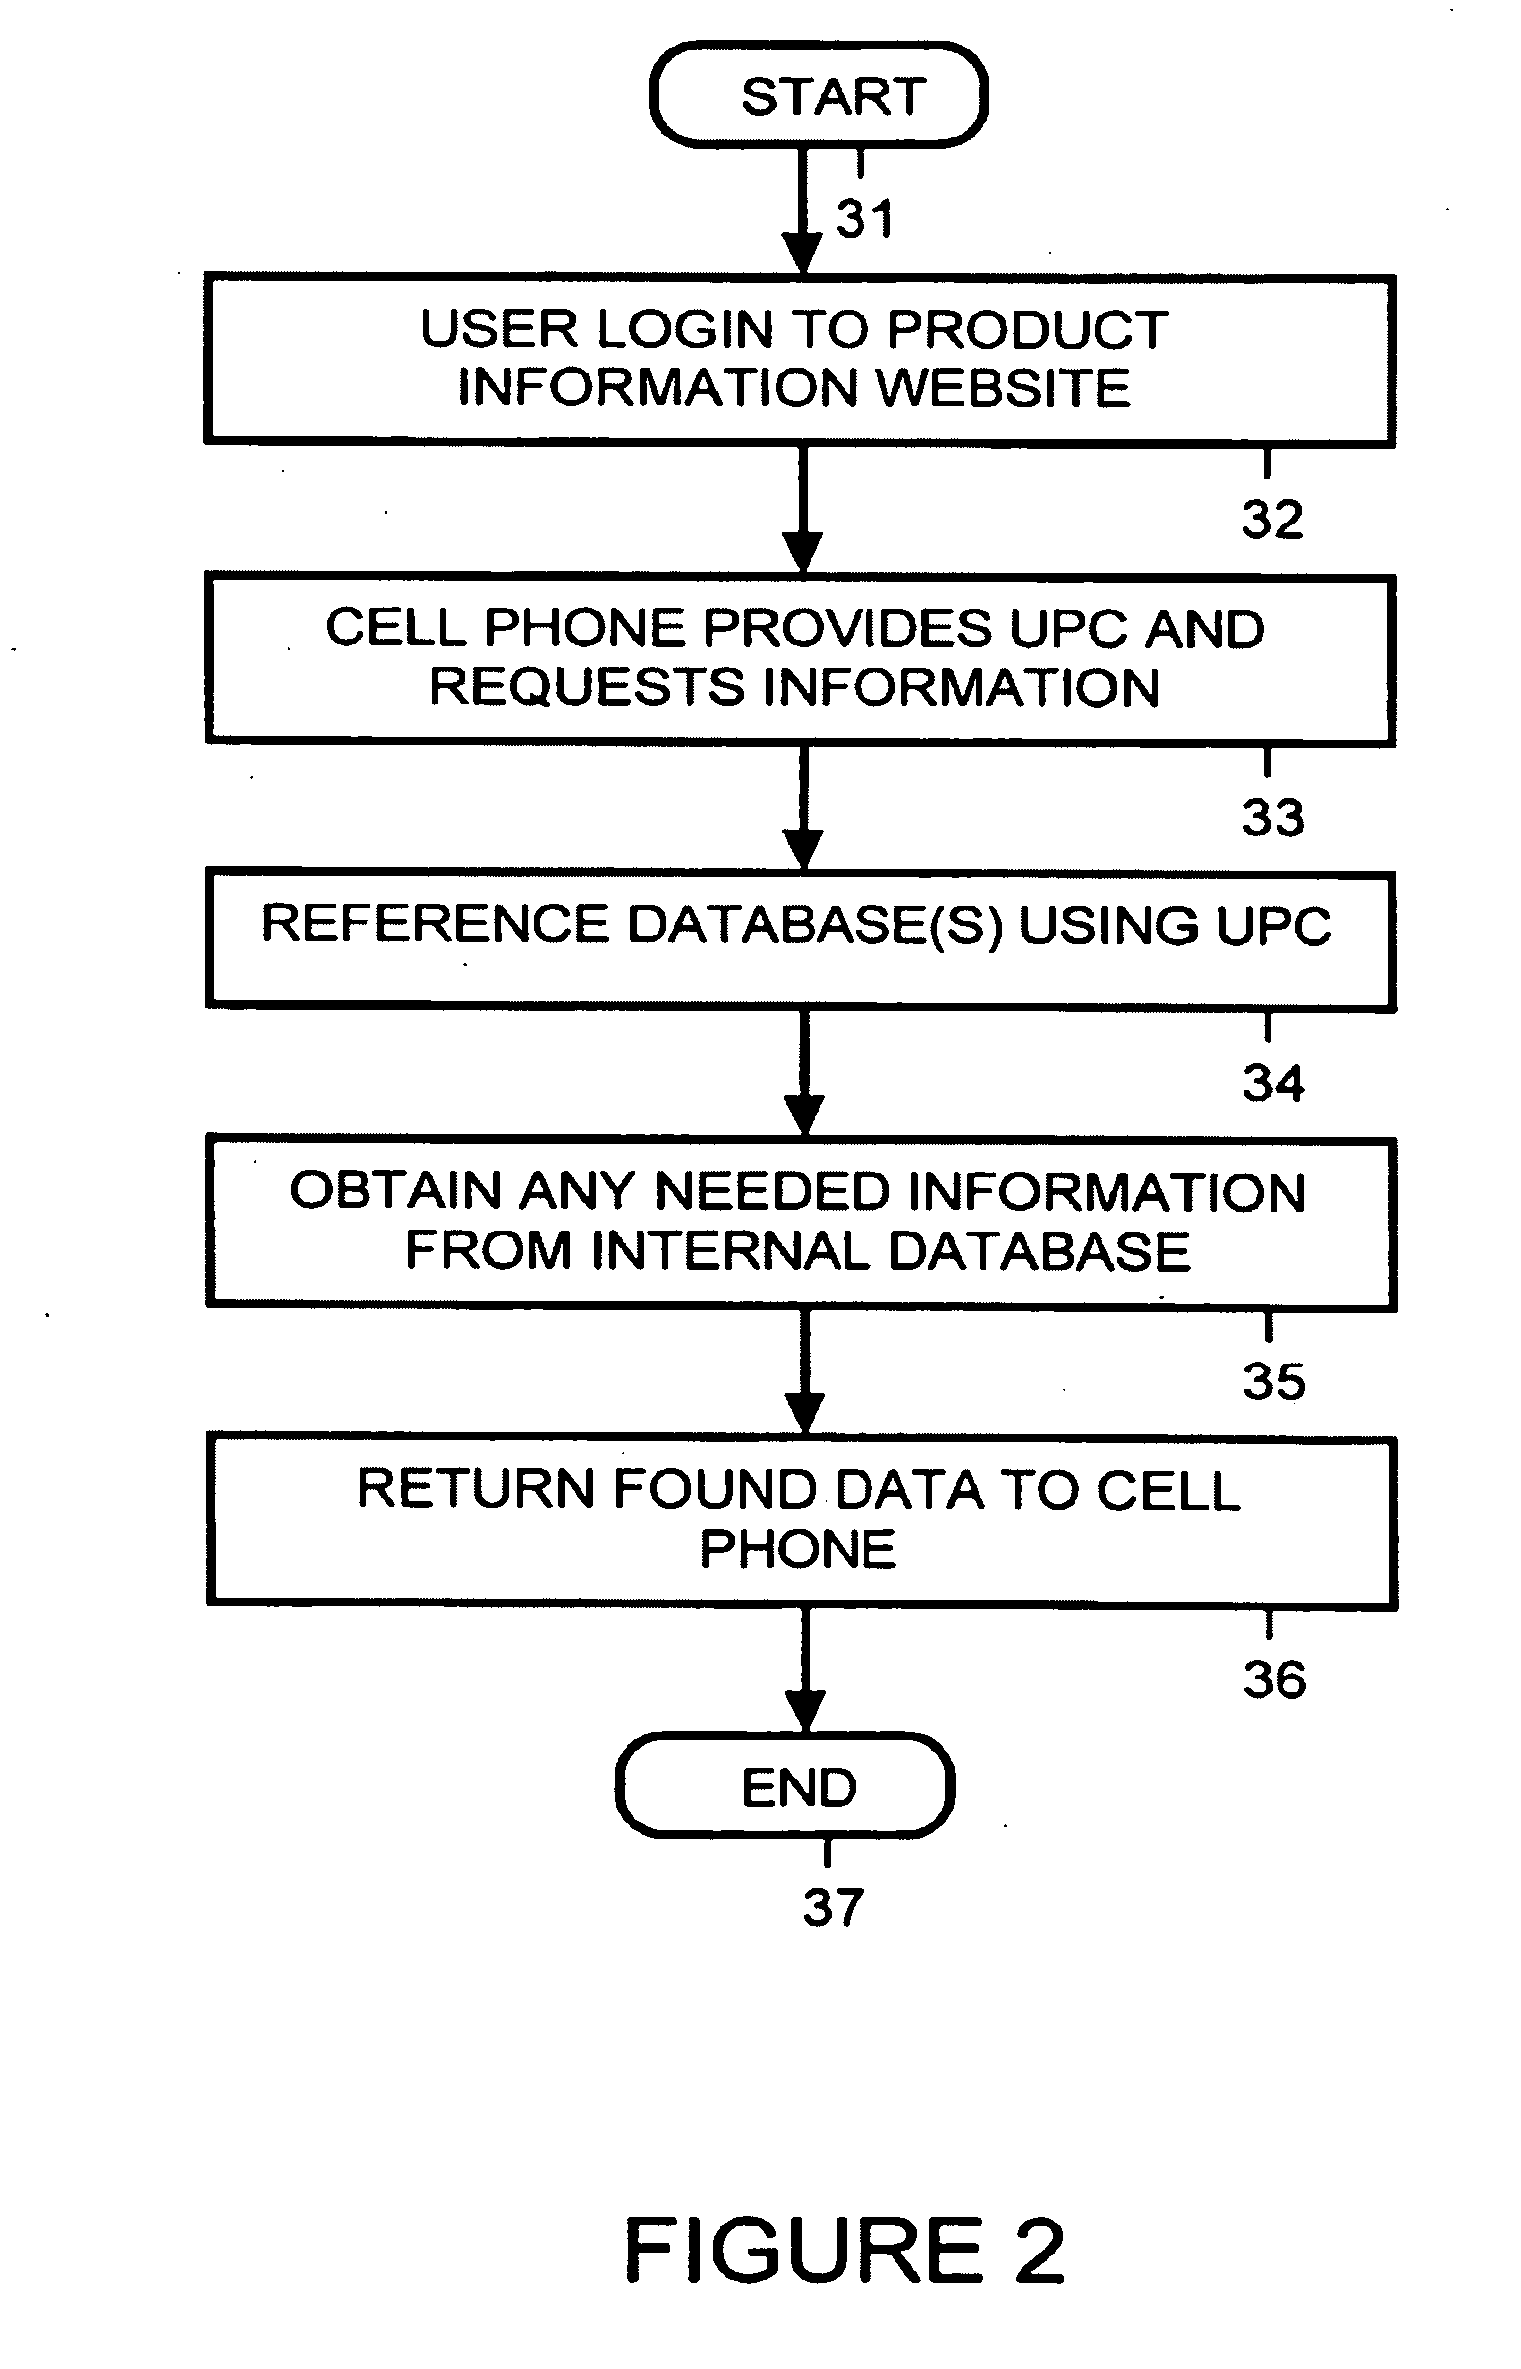 Cell Phone Based Product Research